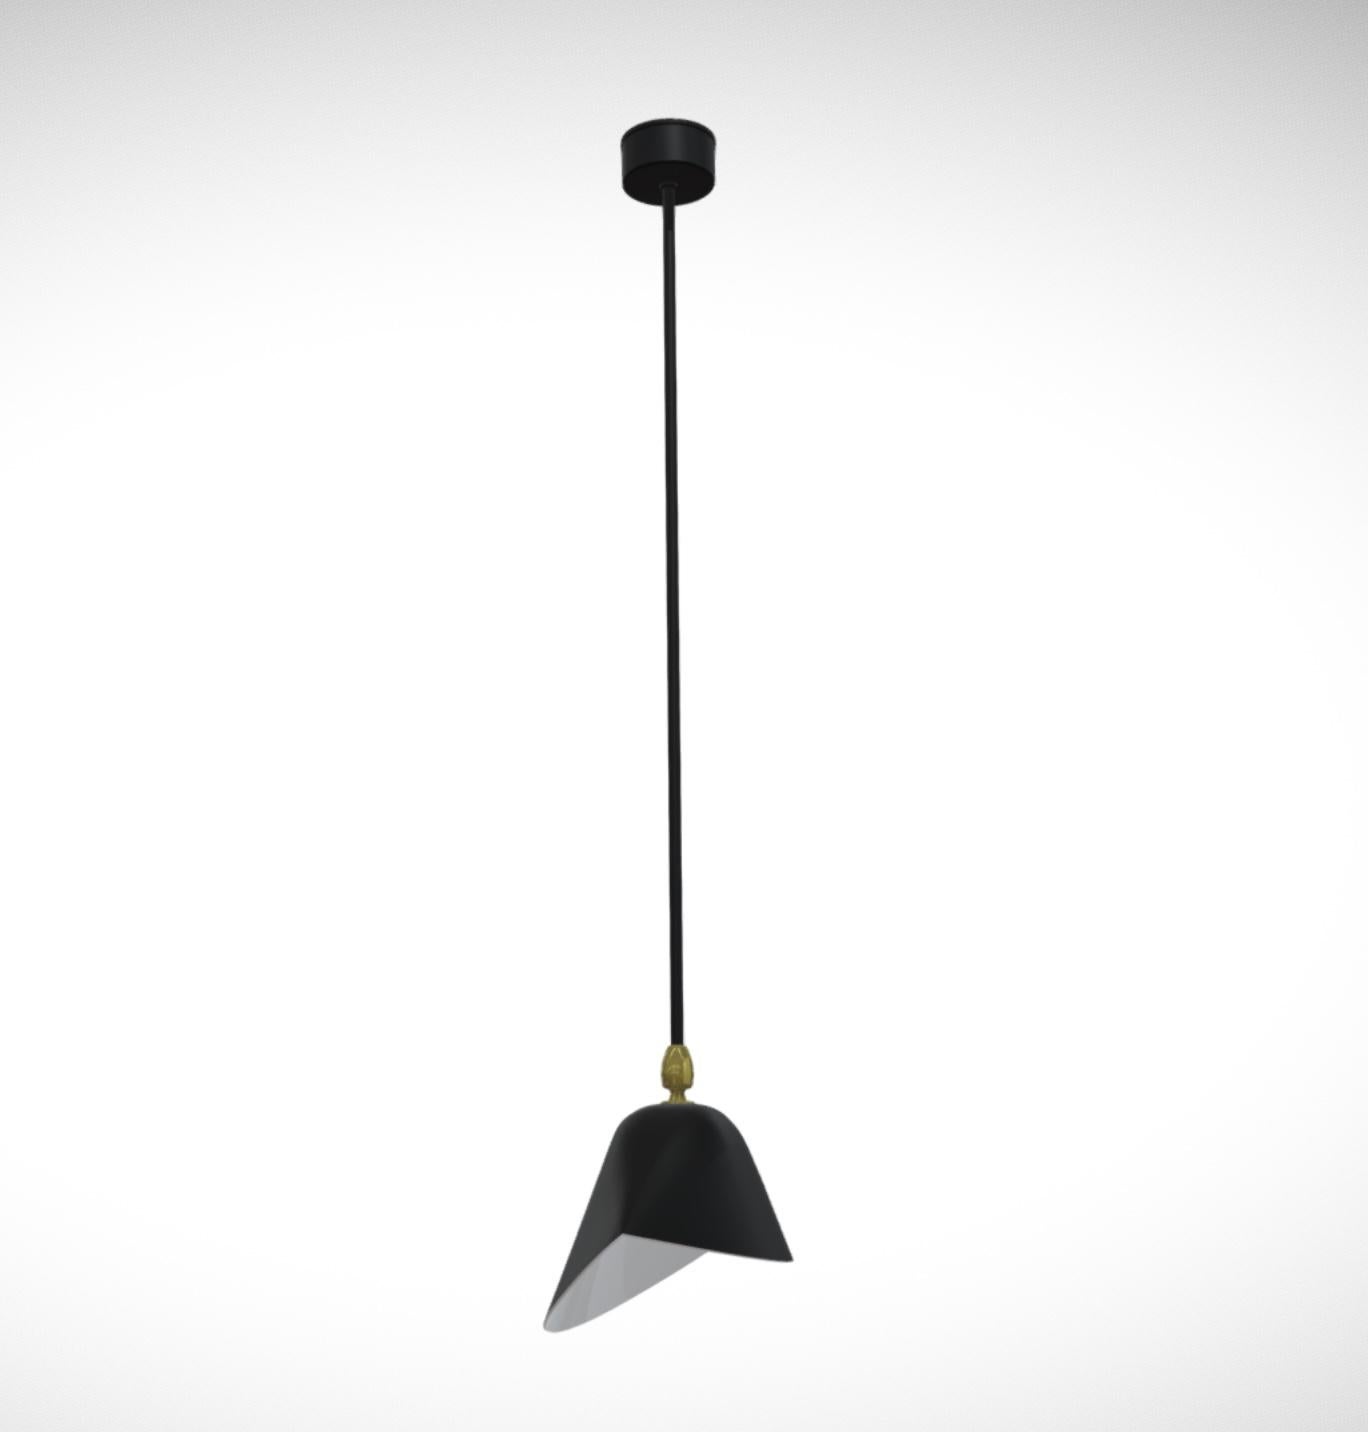 Serge Mouille 'Bibliothèque' Ceiling Lamp in Black In New Condition For Sale In Glendale, CA